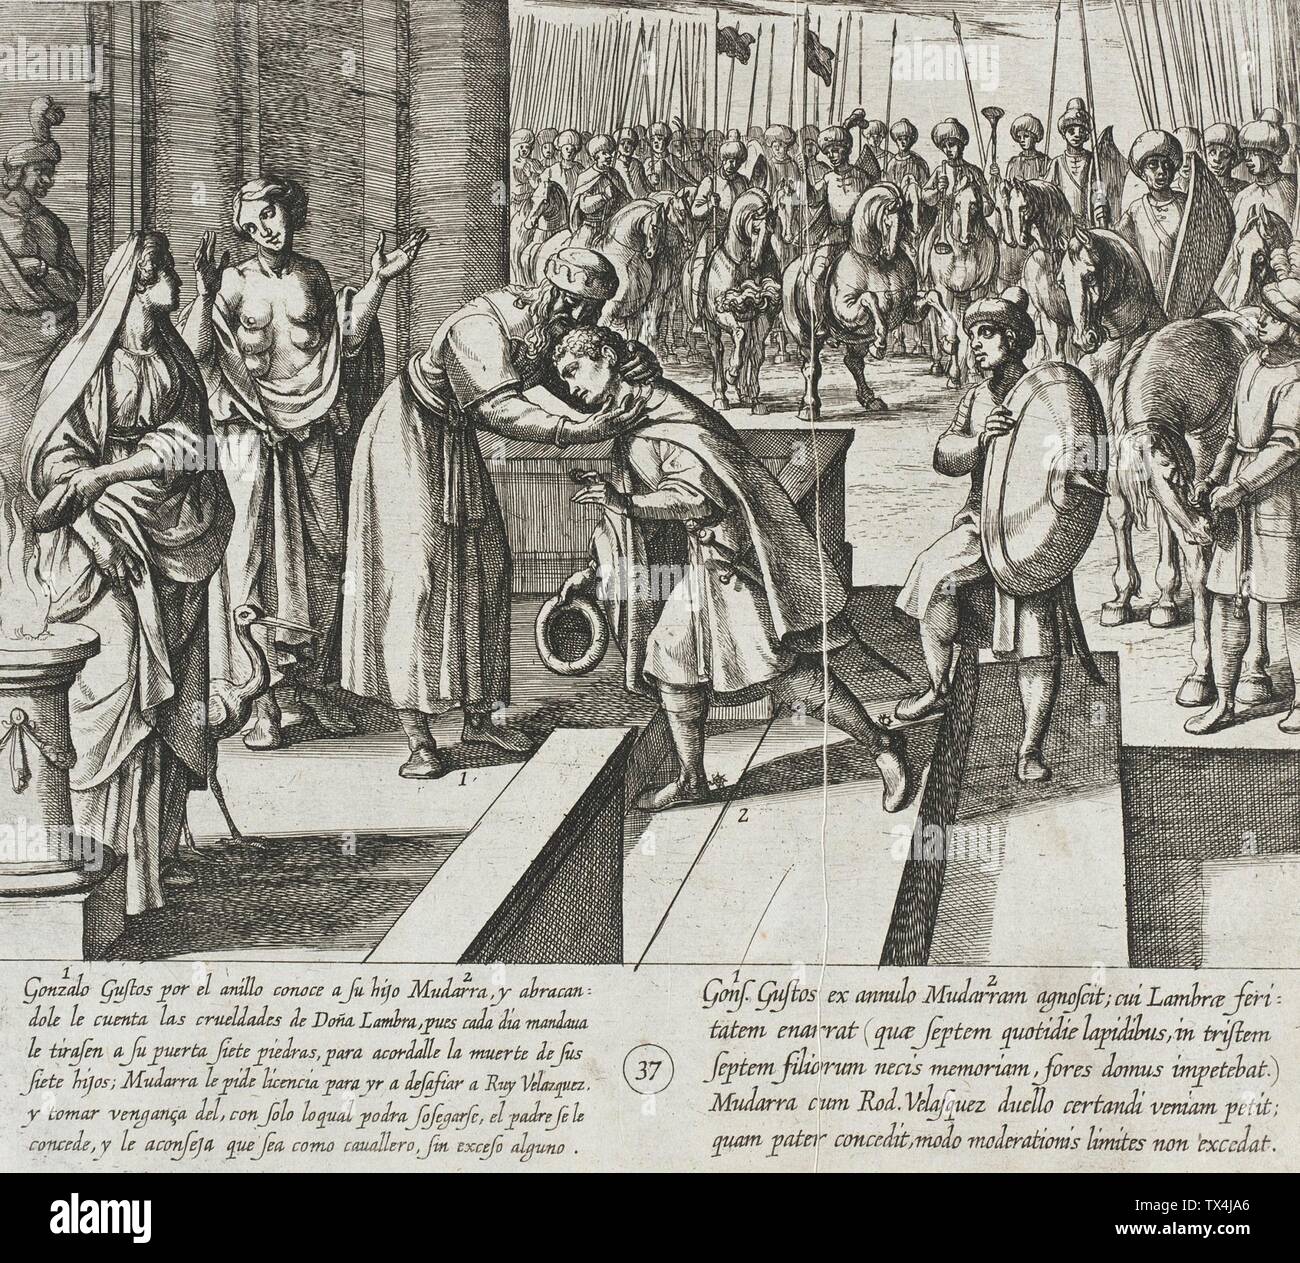 Gonzalo Gustos Recognizes His Son by Means of the Ring. Mudarra Pledges to Avenge the Death of the Infantes;  Italy, 1612 Series: The History of the Seven Sons of Lara, pl. 37 Prints; etchings Etching Los Angeles County Fund (65.37.268) Prints and Drawings; 1612date QS:P571,+1612-00-00T00:00:00Z/9; Stock Photo